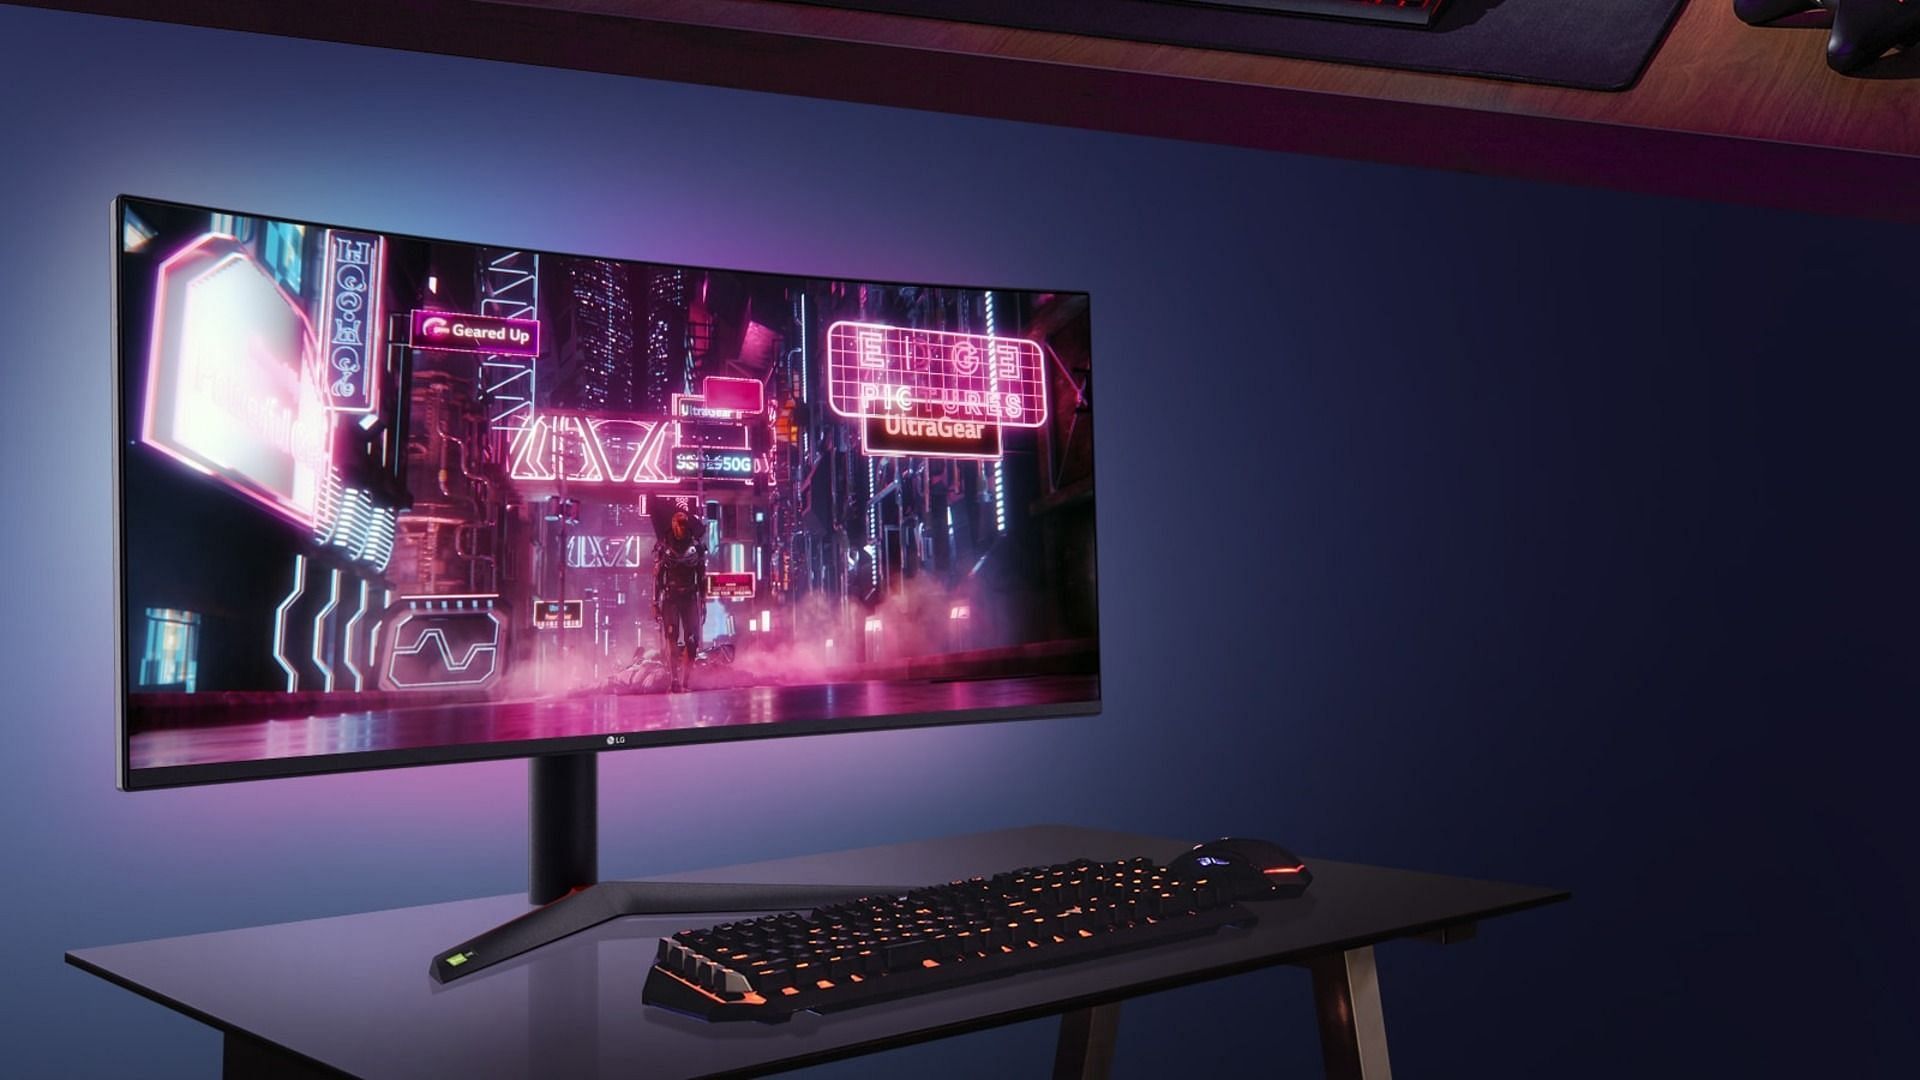 1440p monitors for immersive gaming experience (Image via LG)